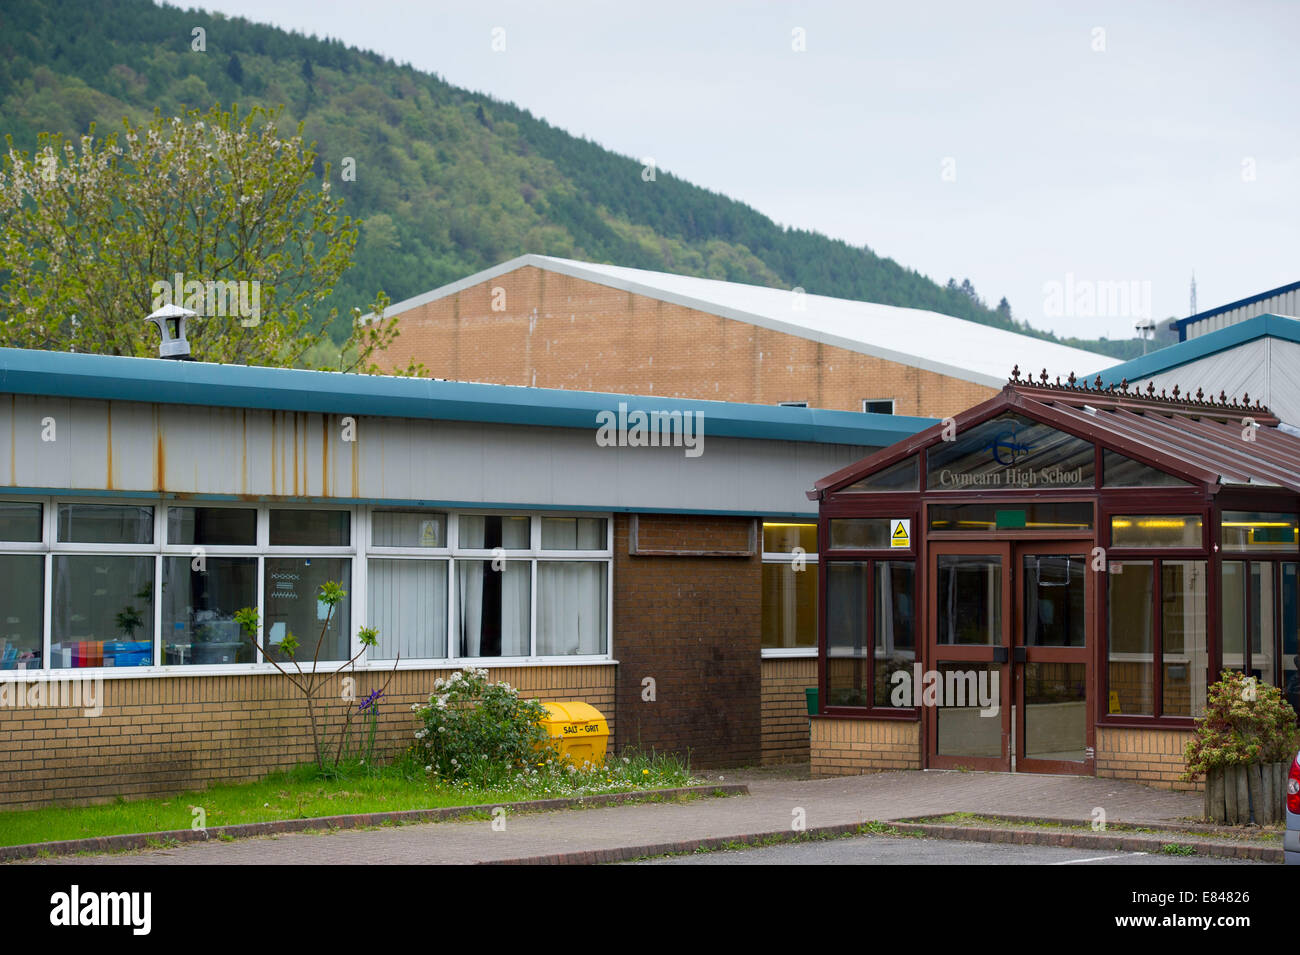 A general view of Cwmcarn High School in Newport, Gwent, Wales. Stock Photo